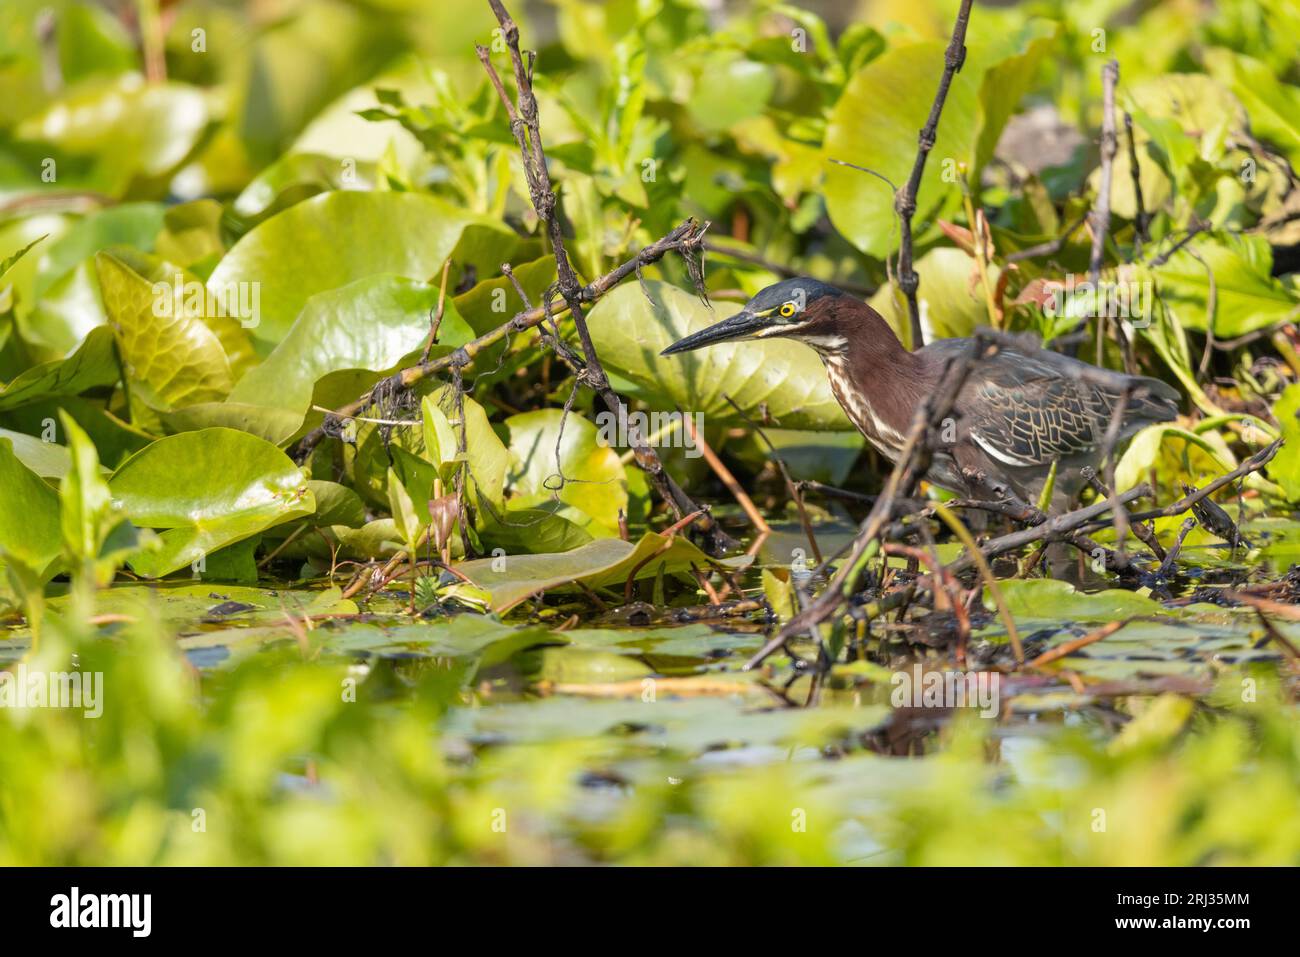 Green heron Butorides virescens, adult foraging on island, Cape May Bird Observatory, New Jersey, USA, May Stock Photo